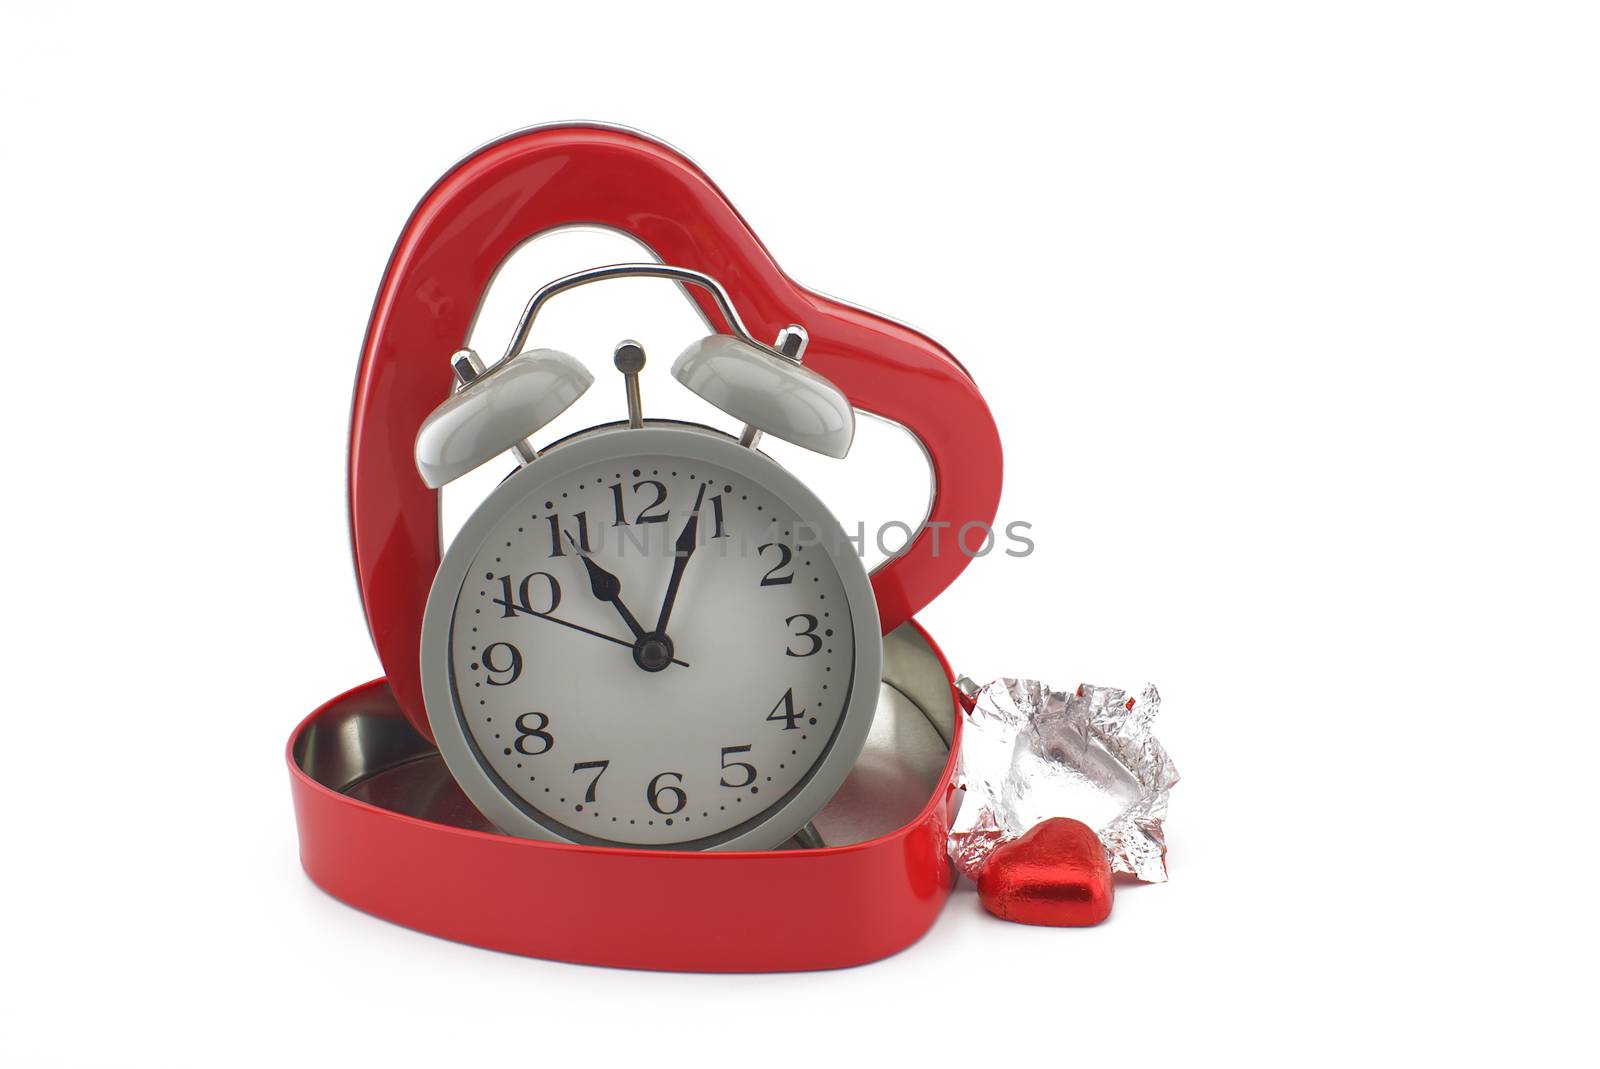 Retro alarm clock in a red heart shaped box by NetPix